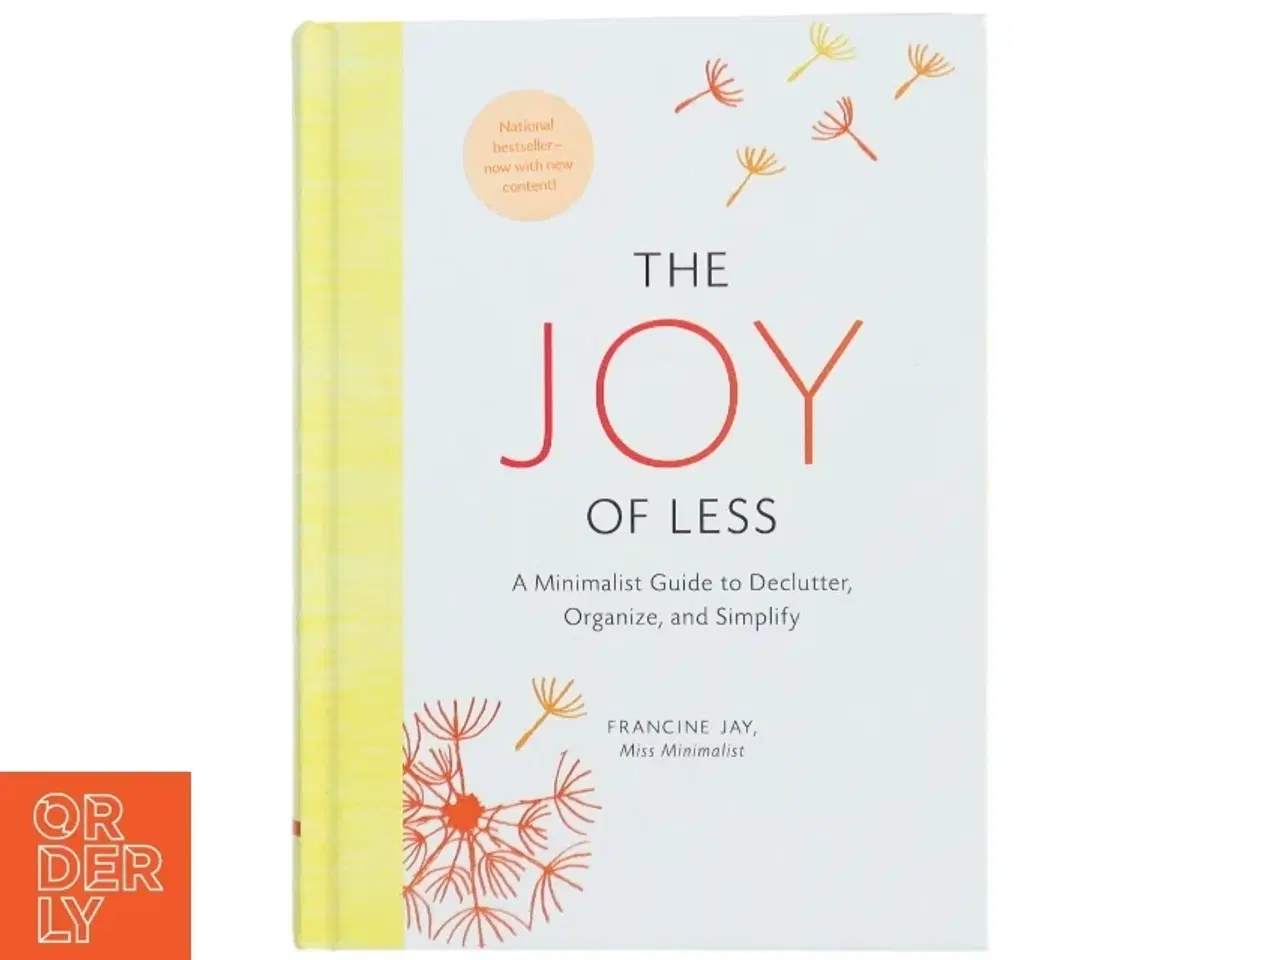 Billede 1 - The Joy of Less: A Minimalist Guide to Declutter, Organize, and Simplify - Updated and Revised (Minimalism Books, Home Organization Books, Declutterin